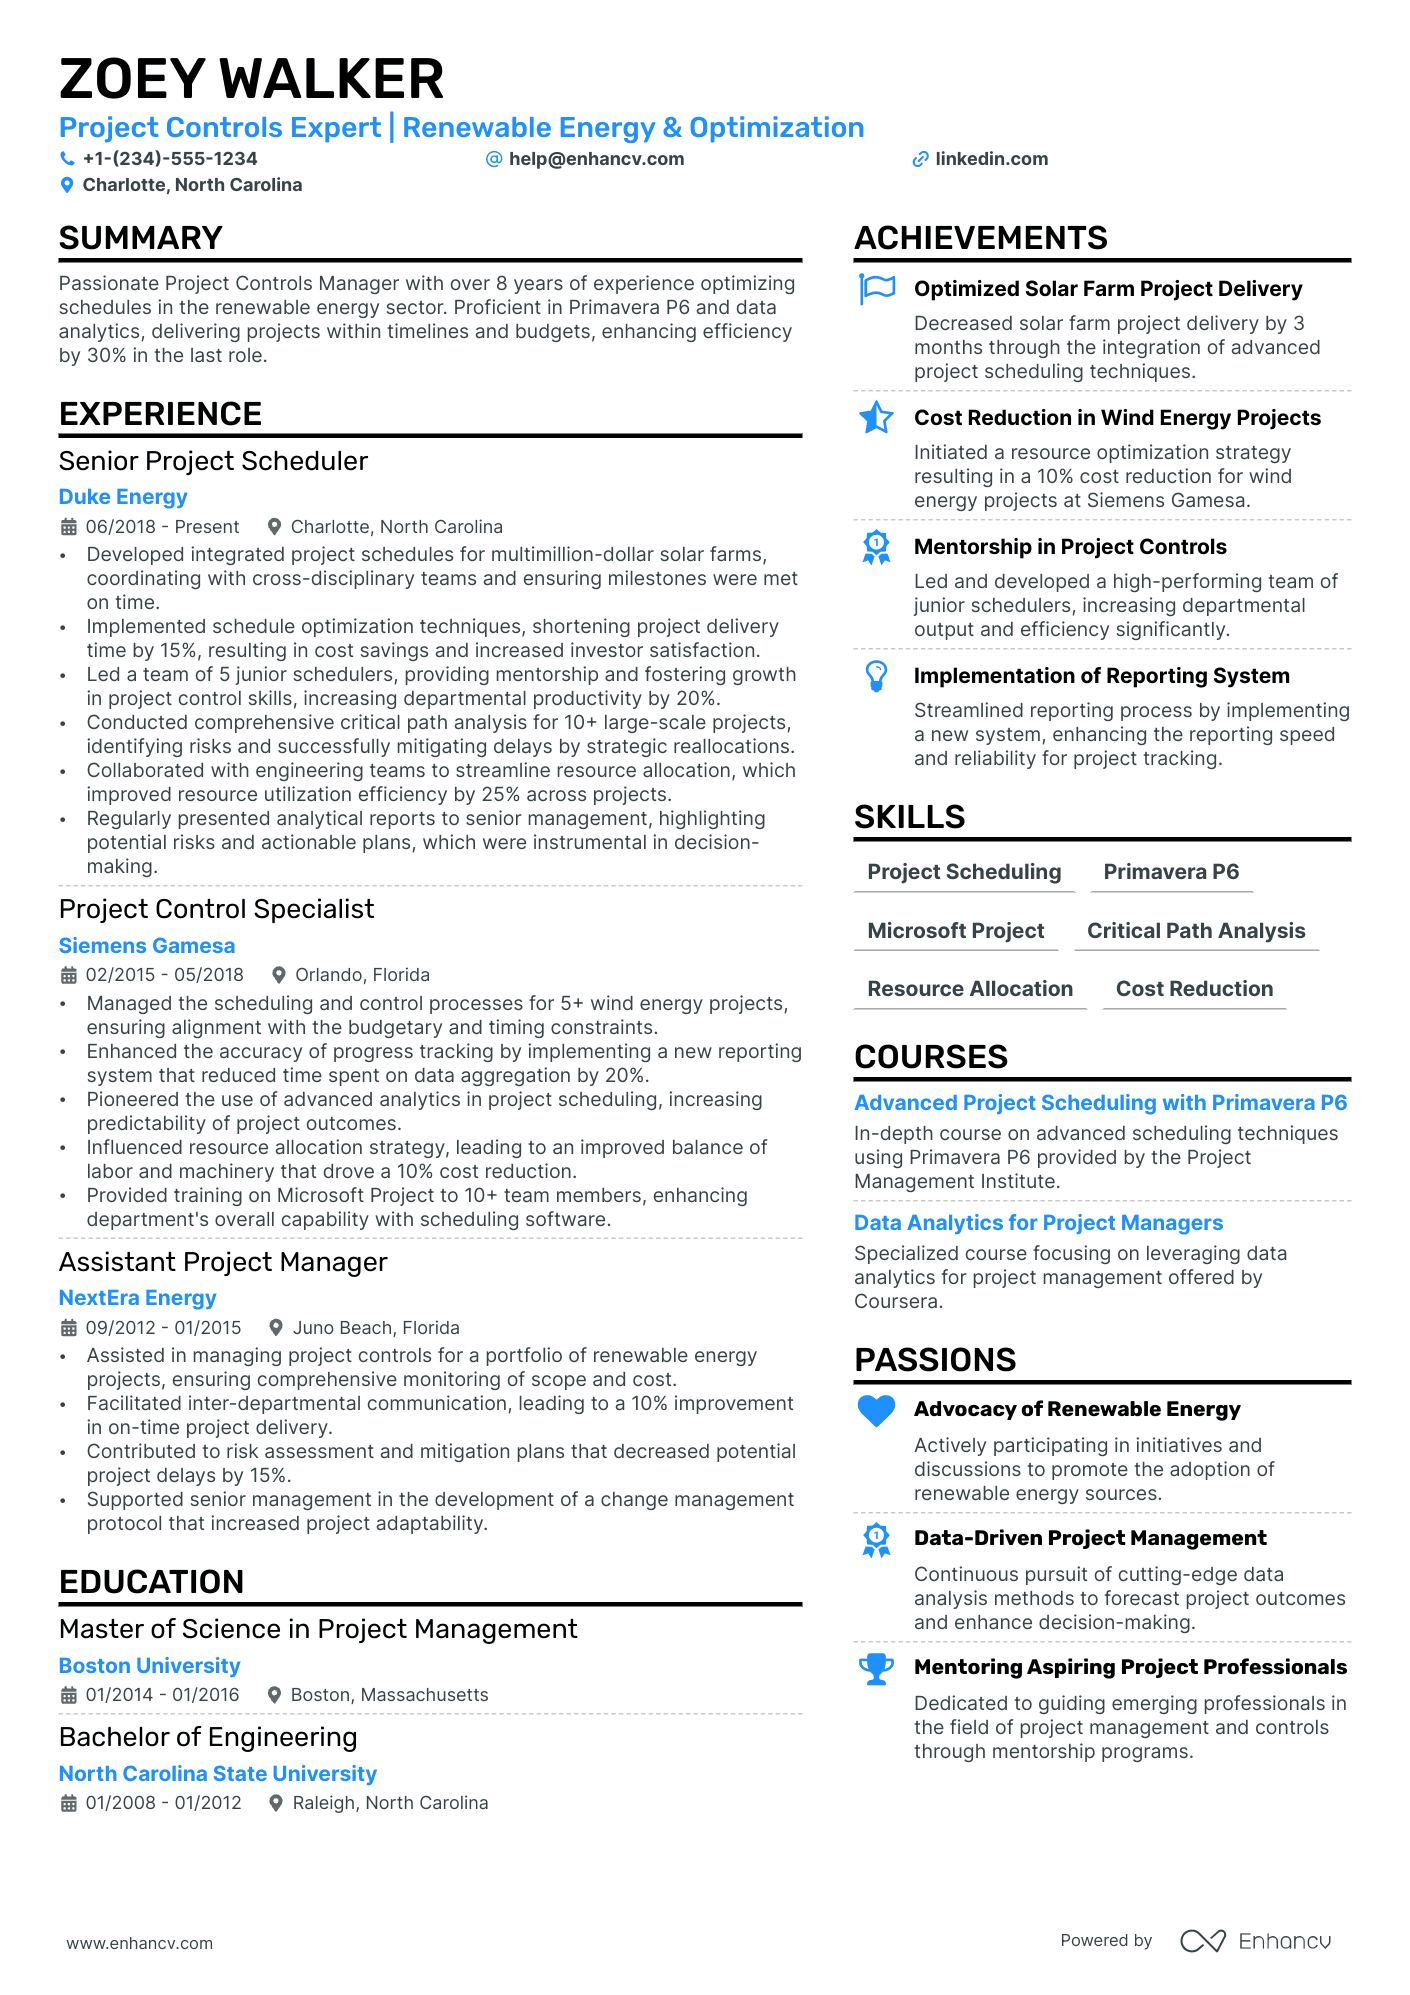 Project Controls Manager resume example